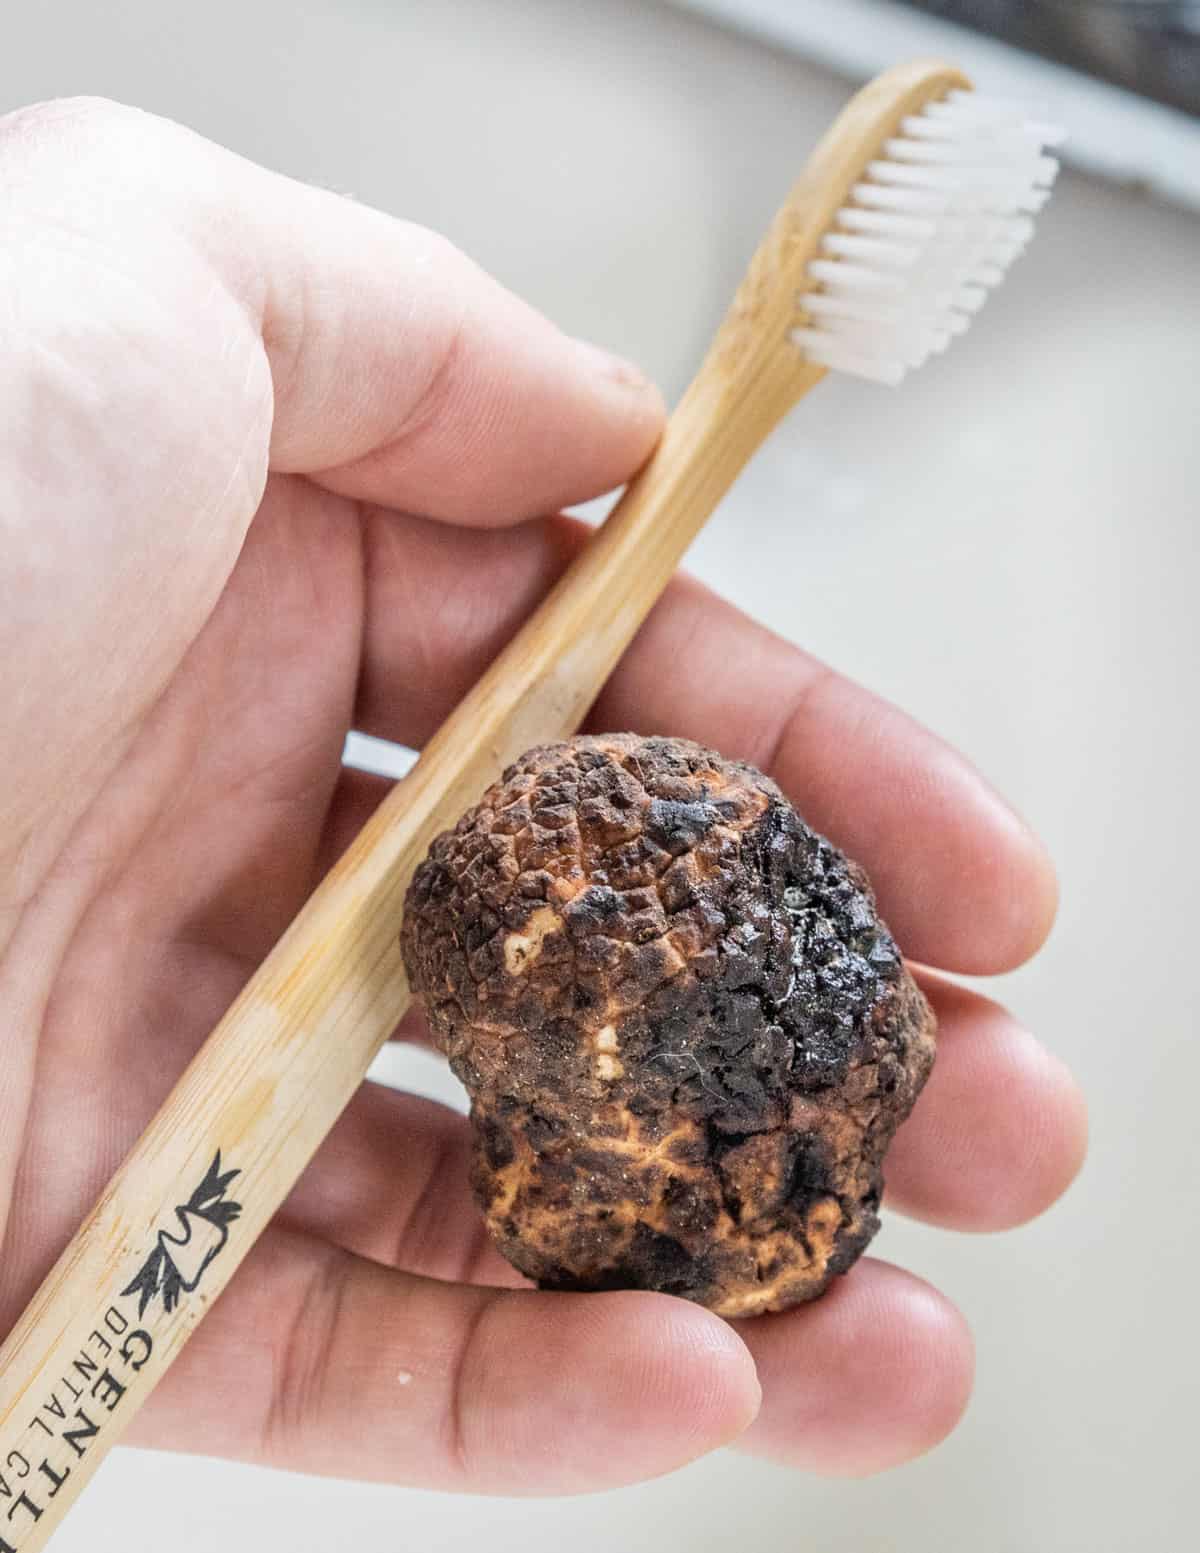 scrubbing a truffle with a tootbrush to clean it over the sink